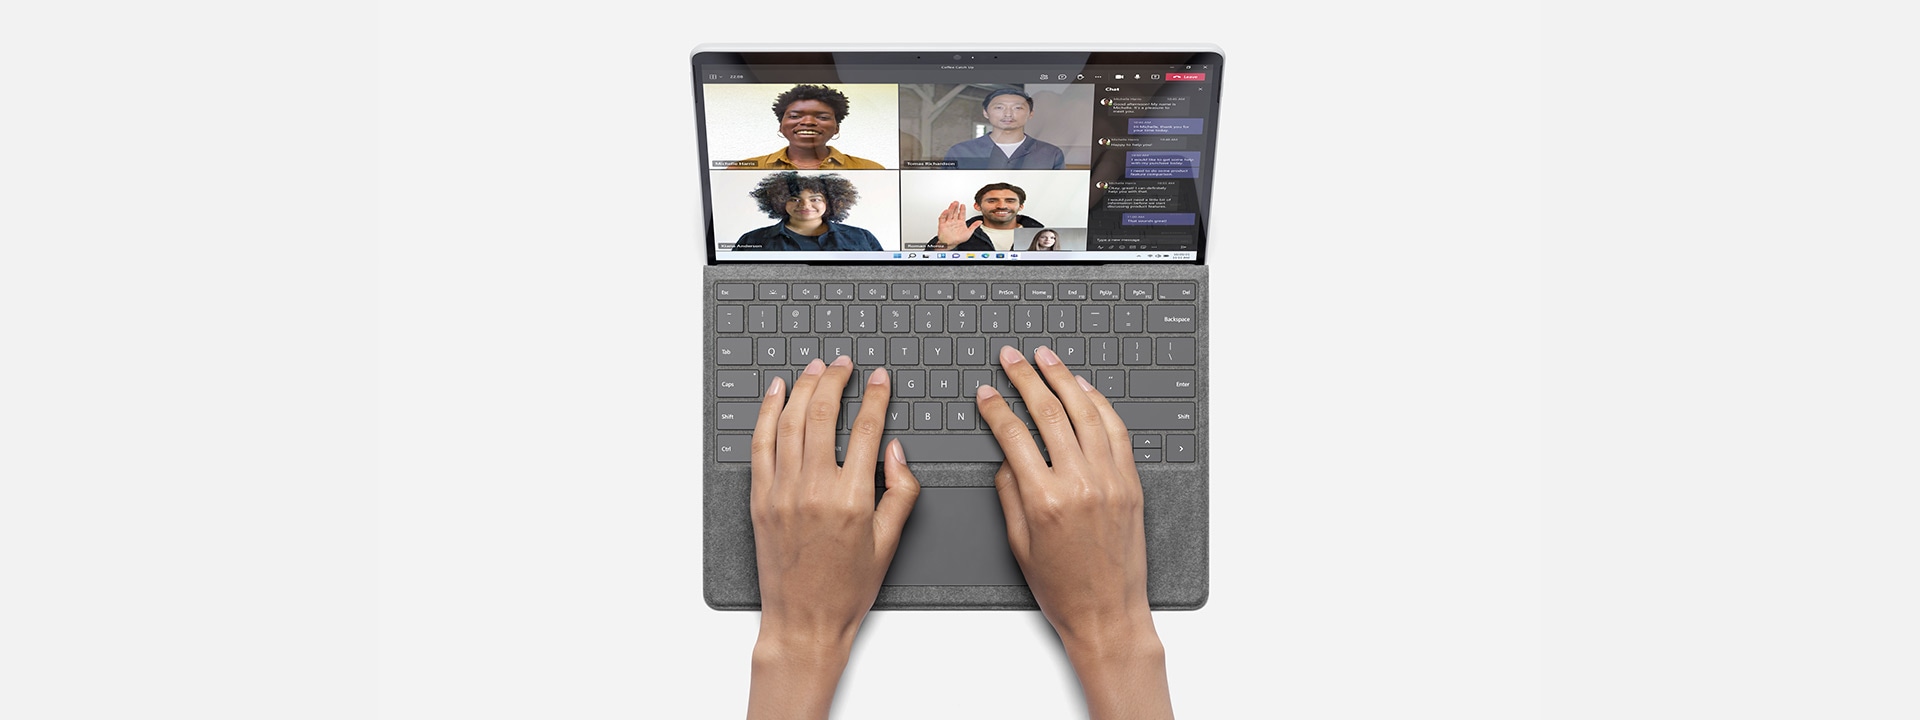 Surface Pro X shown as a laptop with Windows 11.